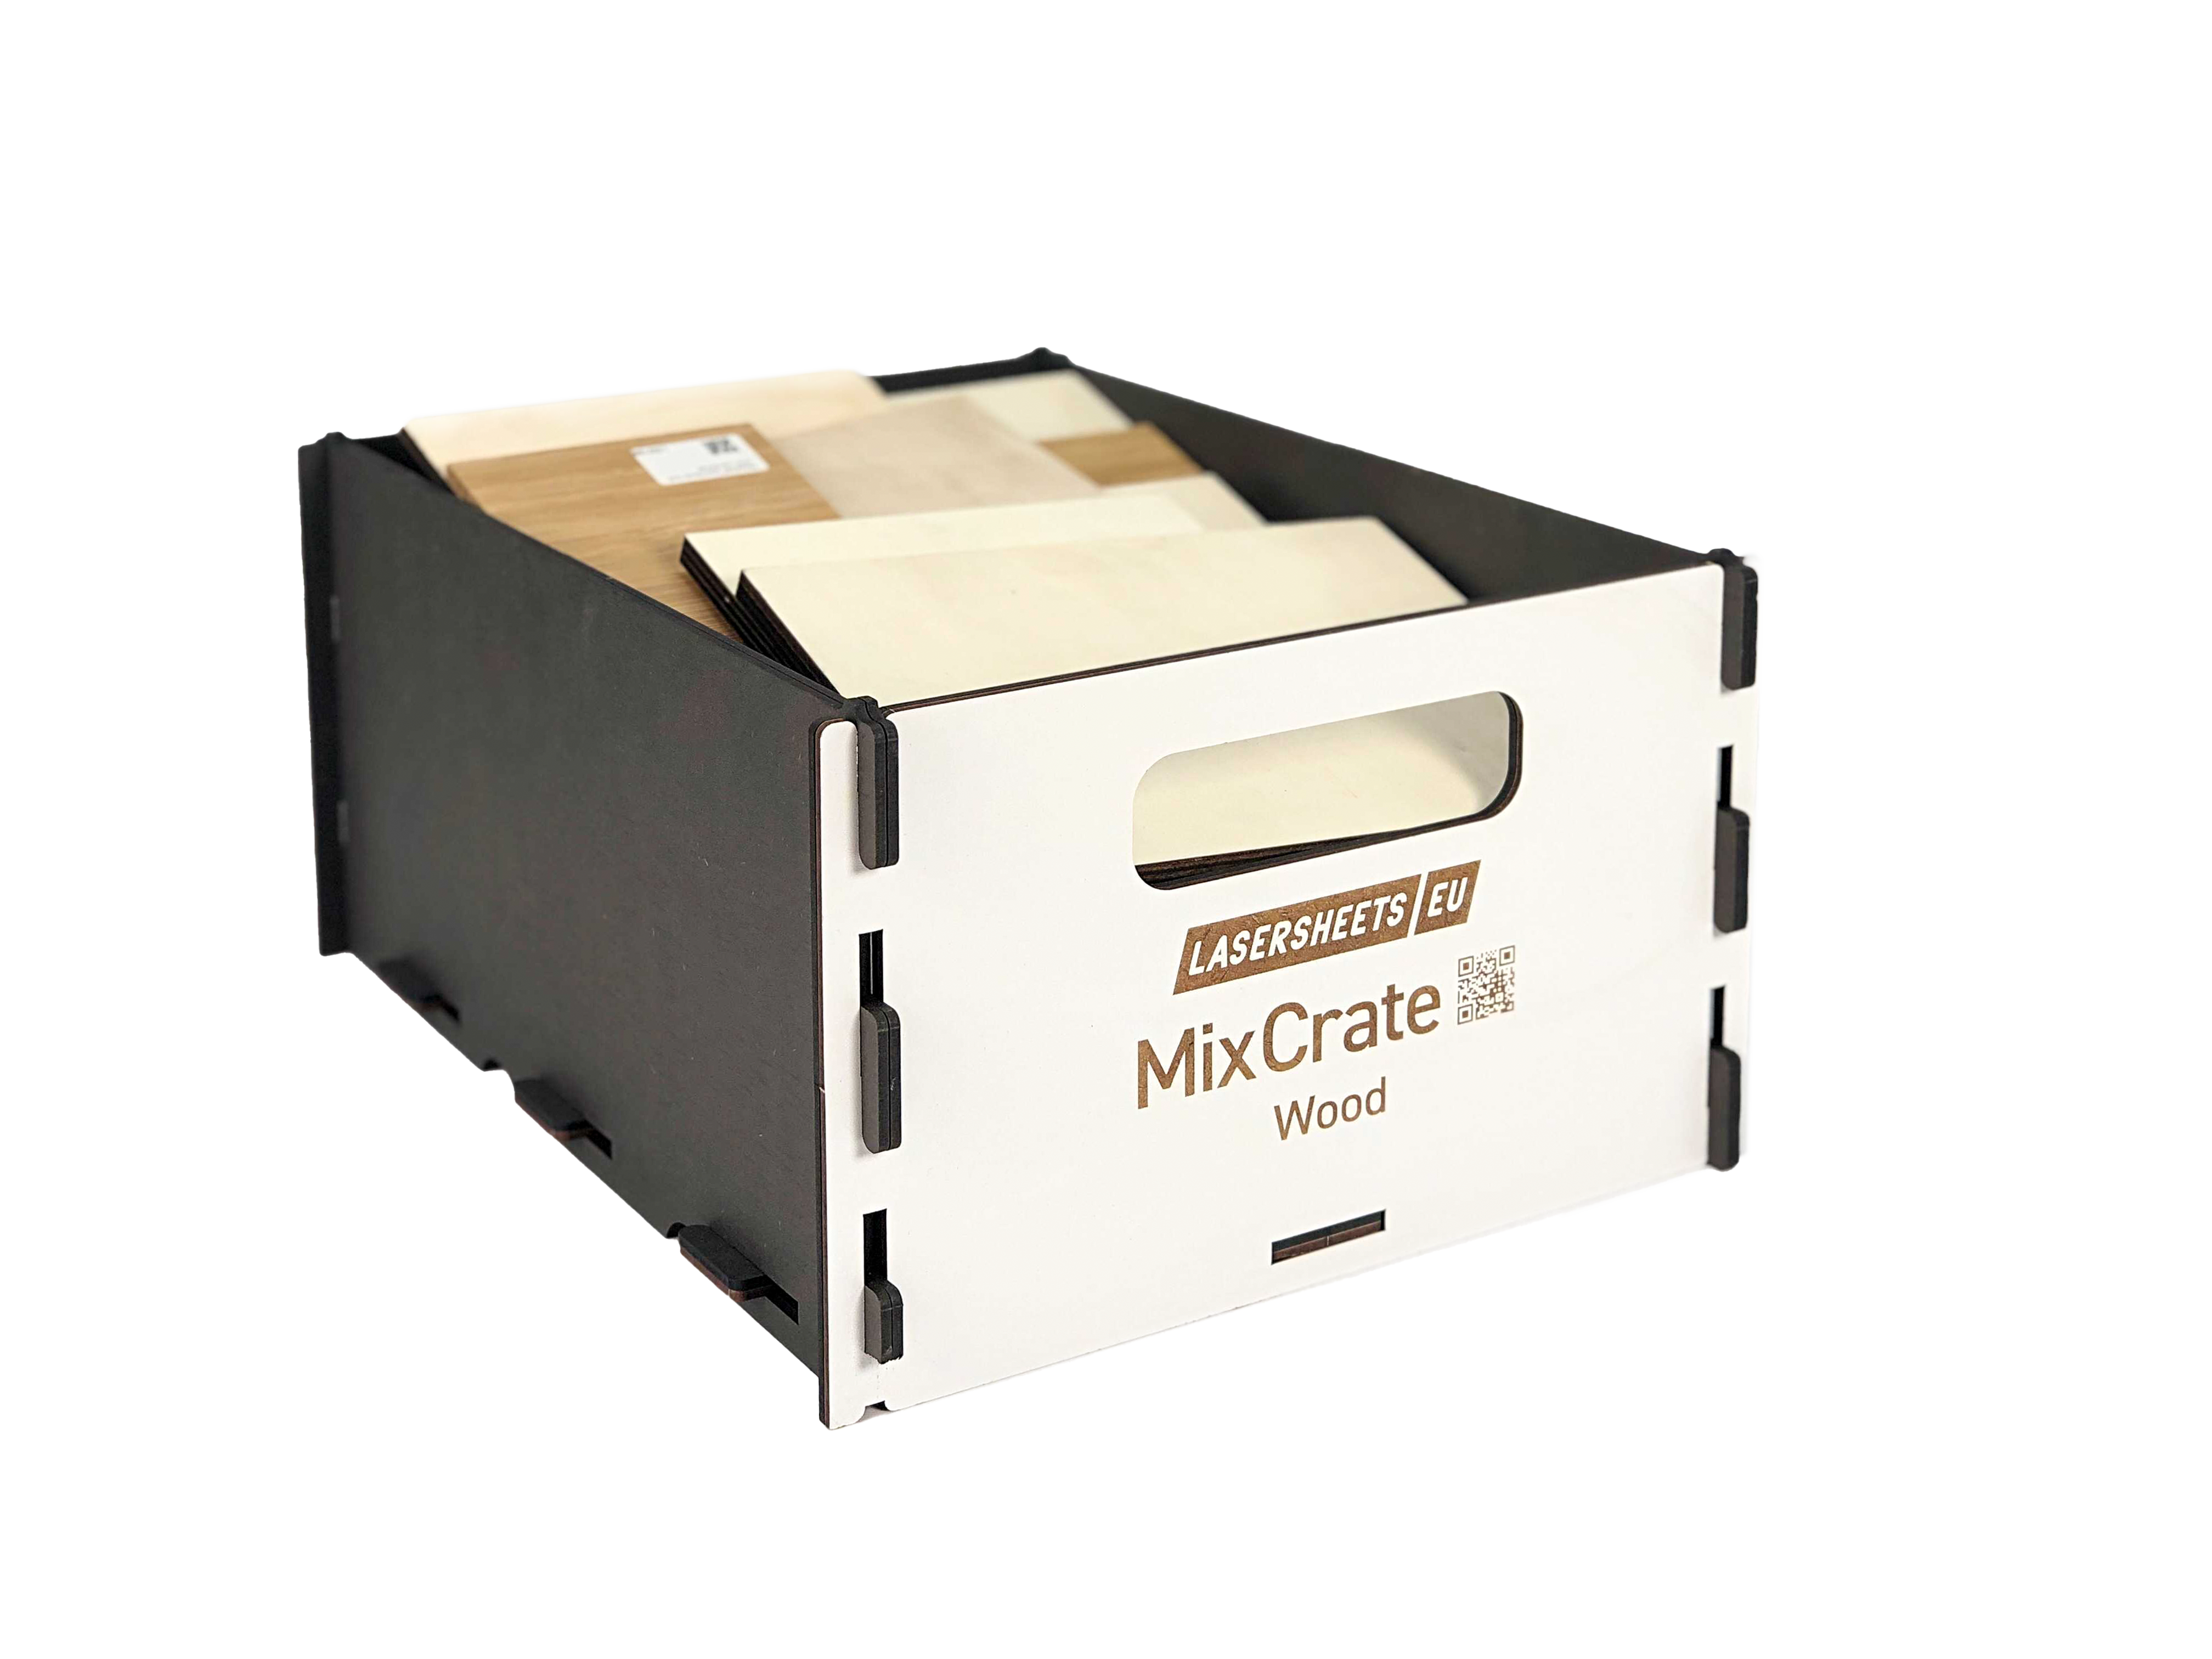 MixCrate | Crate of mixed laser materials in wood for laser cutting